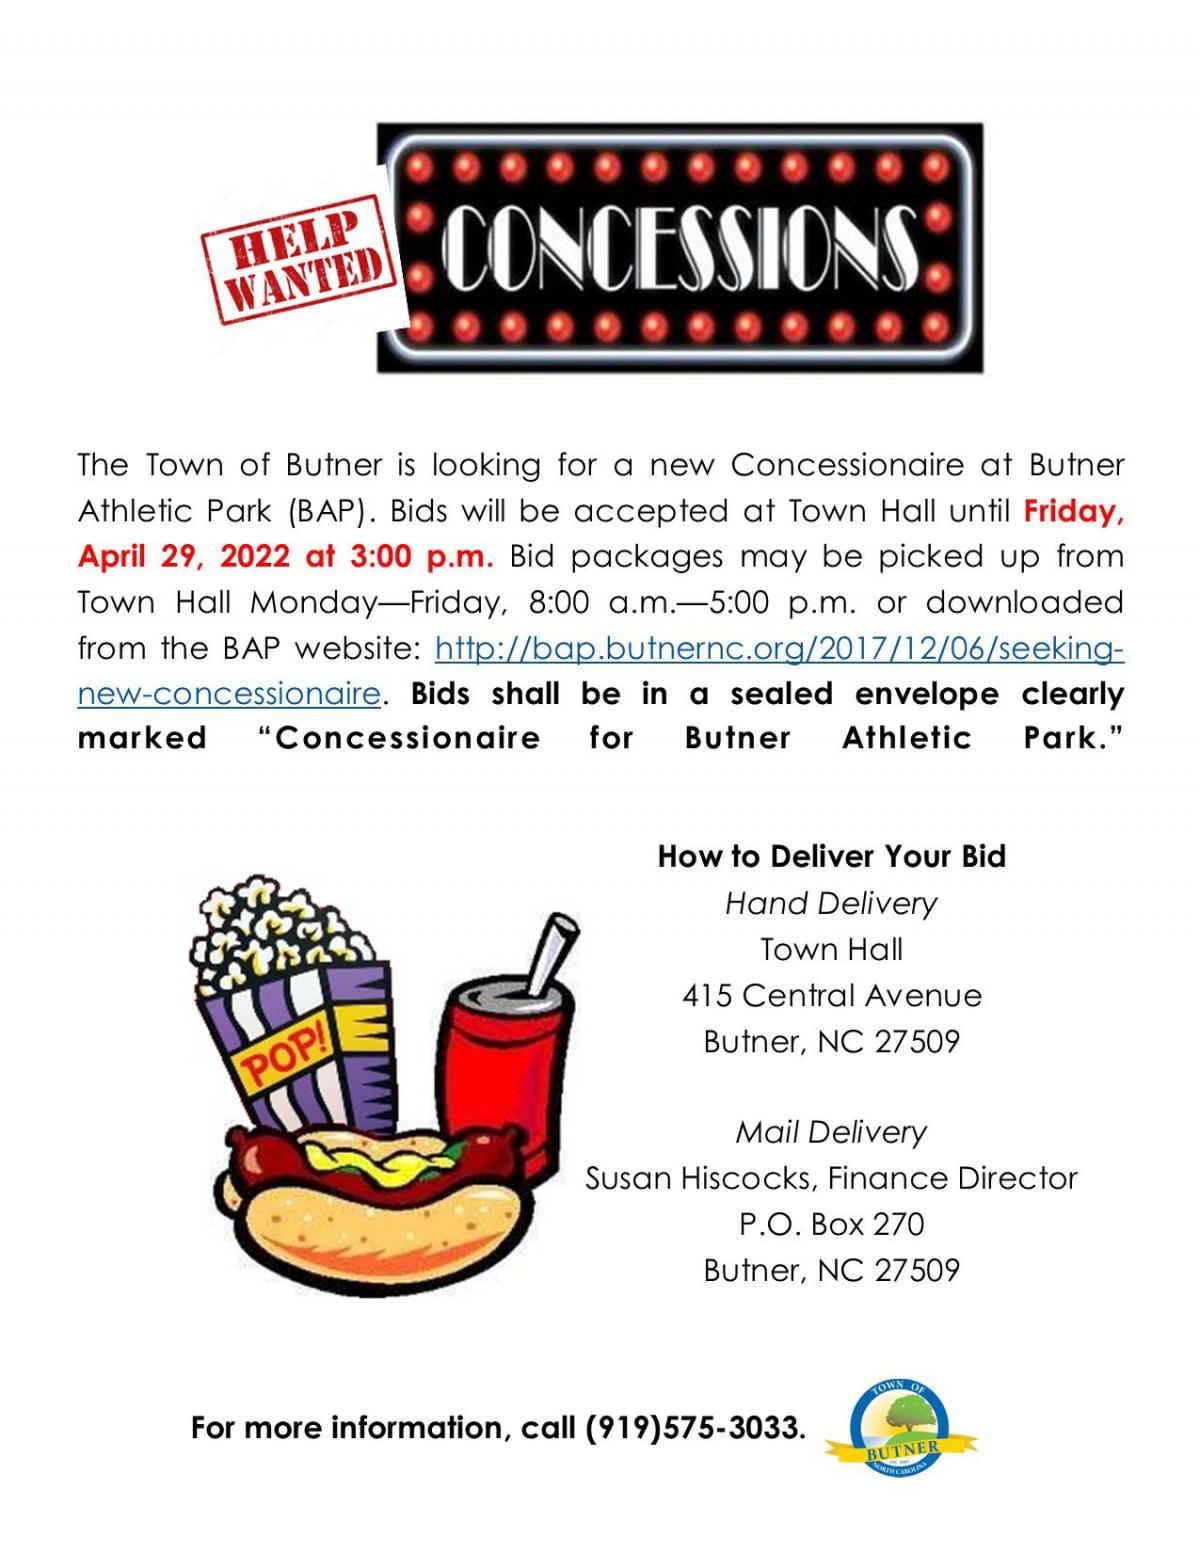 Concessionaire at the BAP